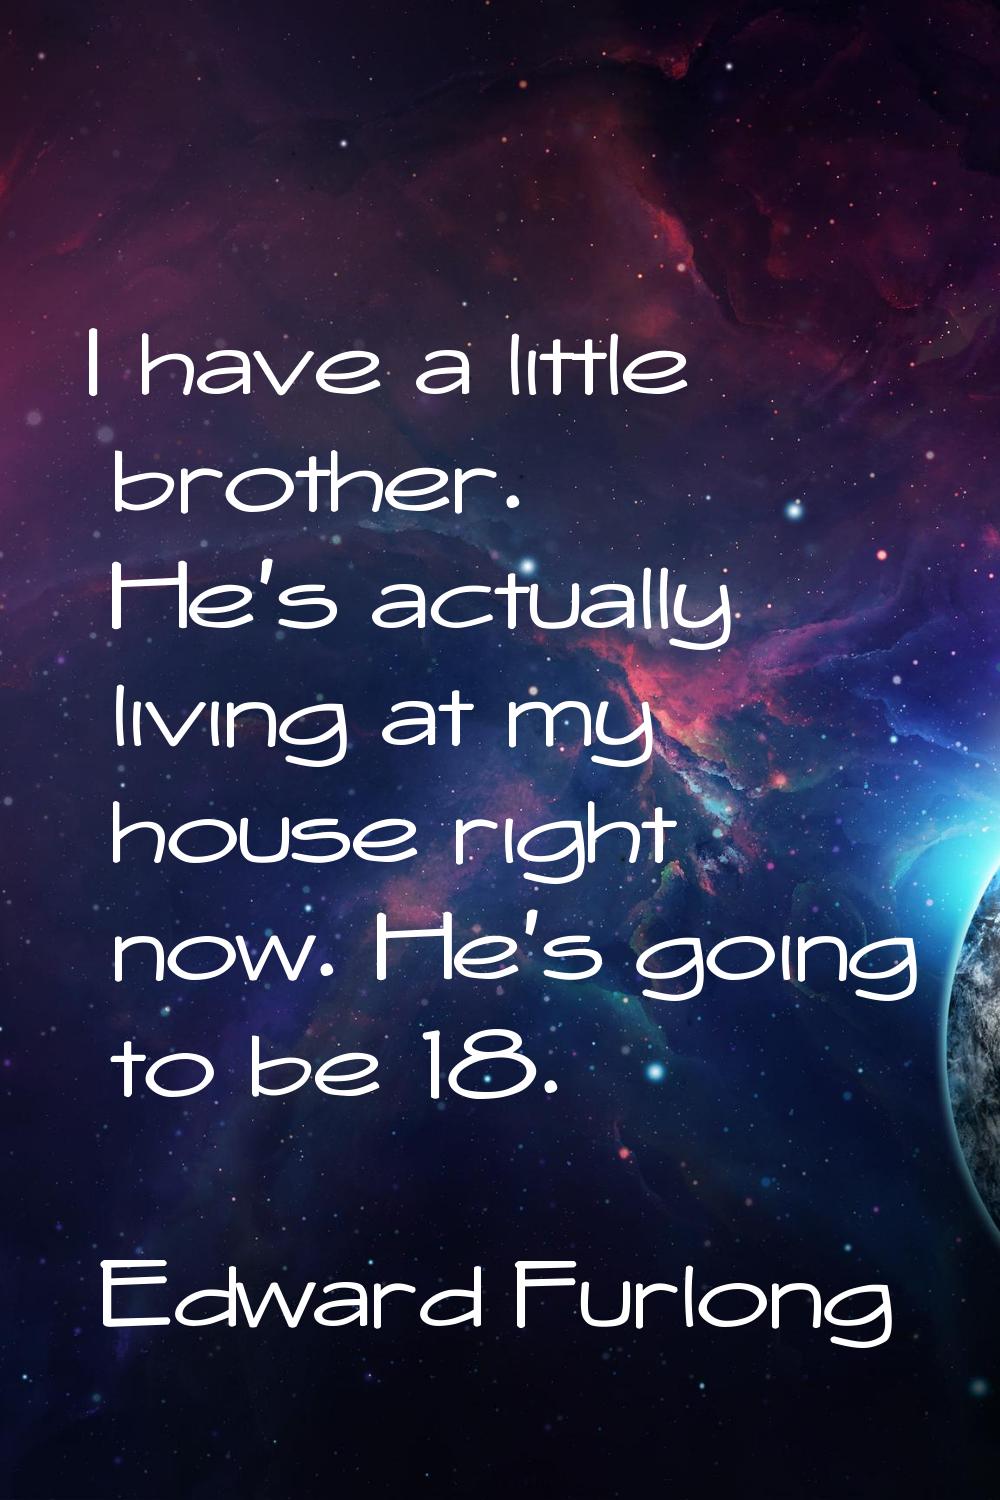 I have a little brother. He's actually living at my house right now. He's going to be 18.